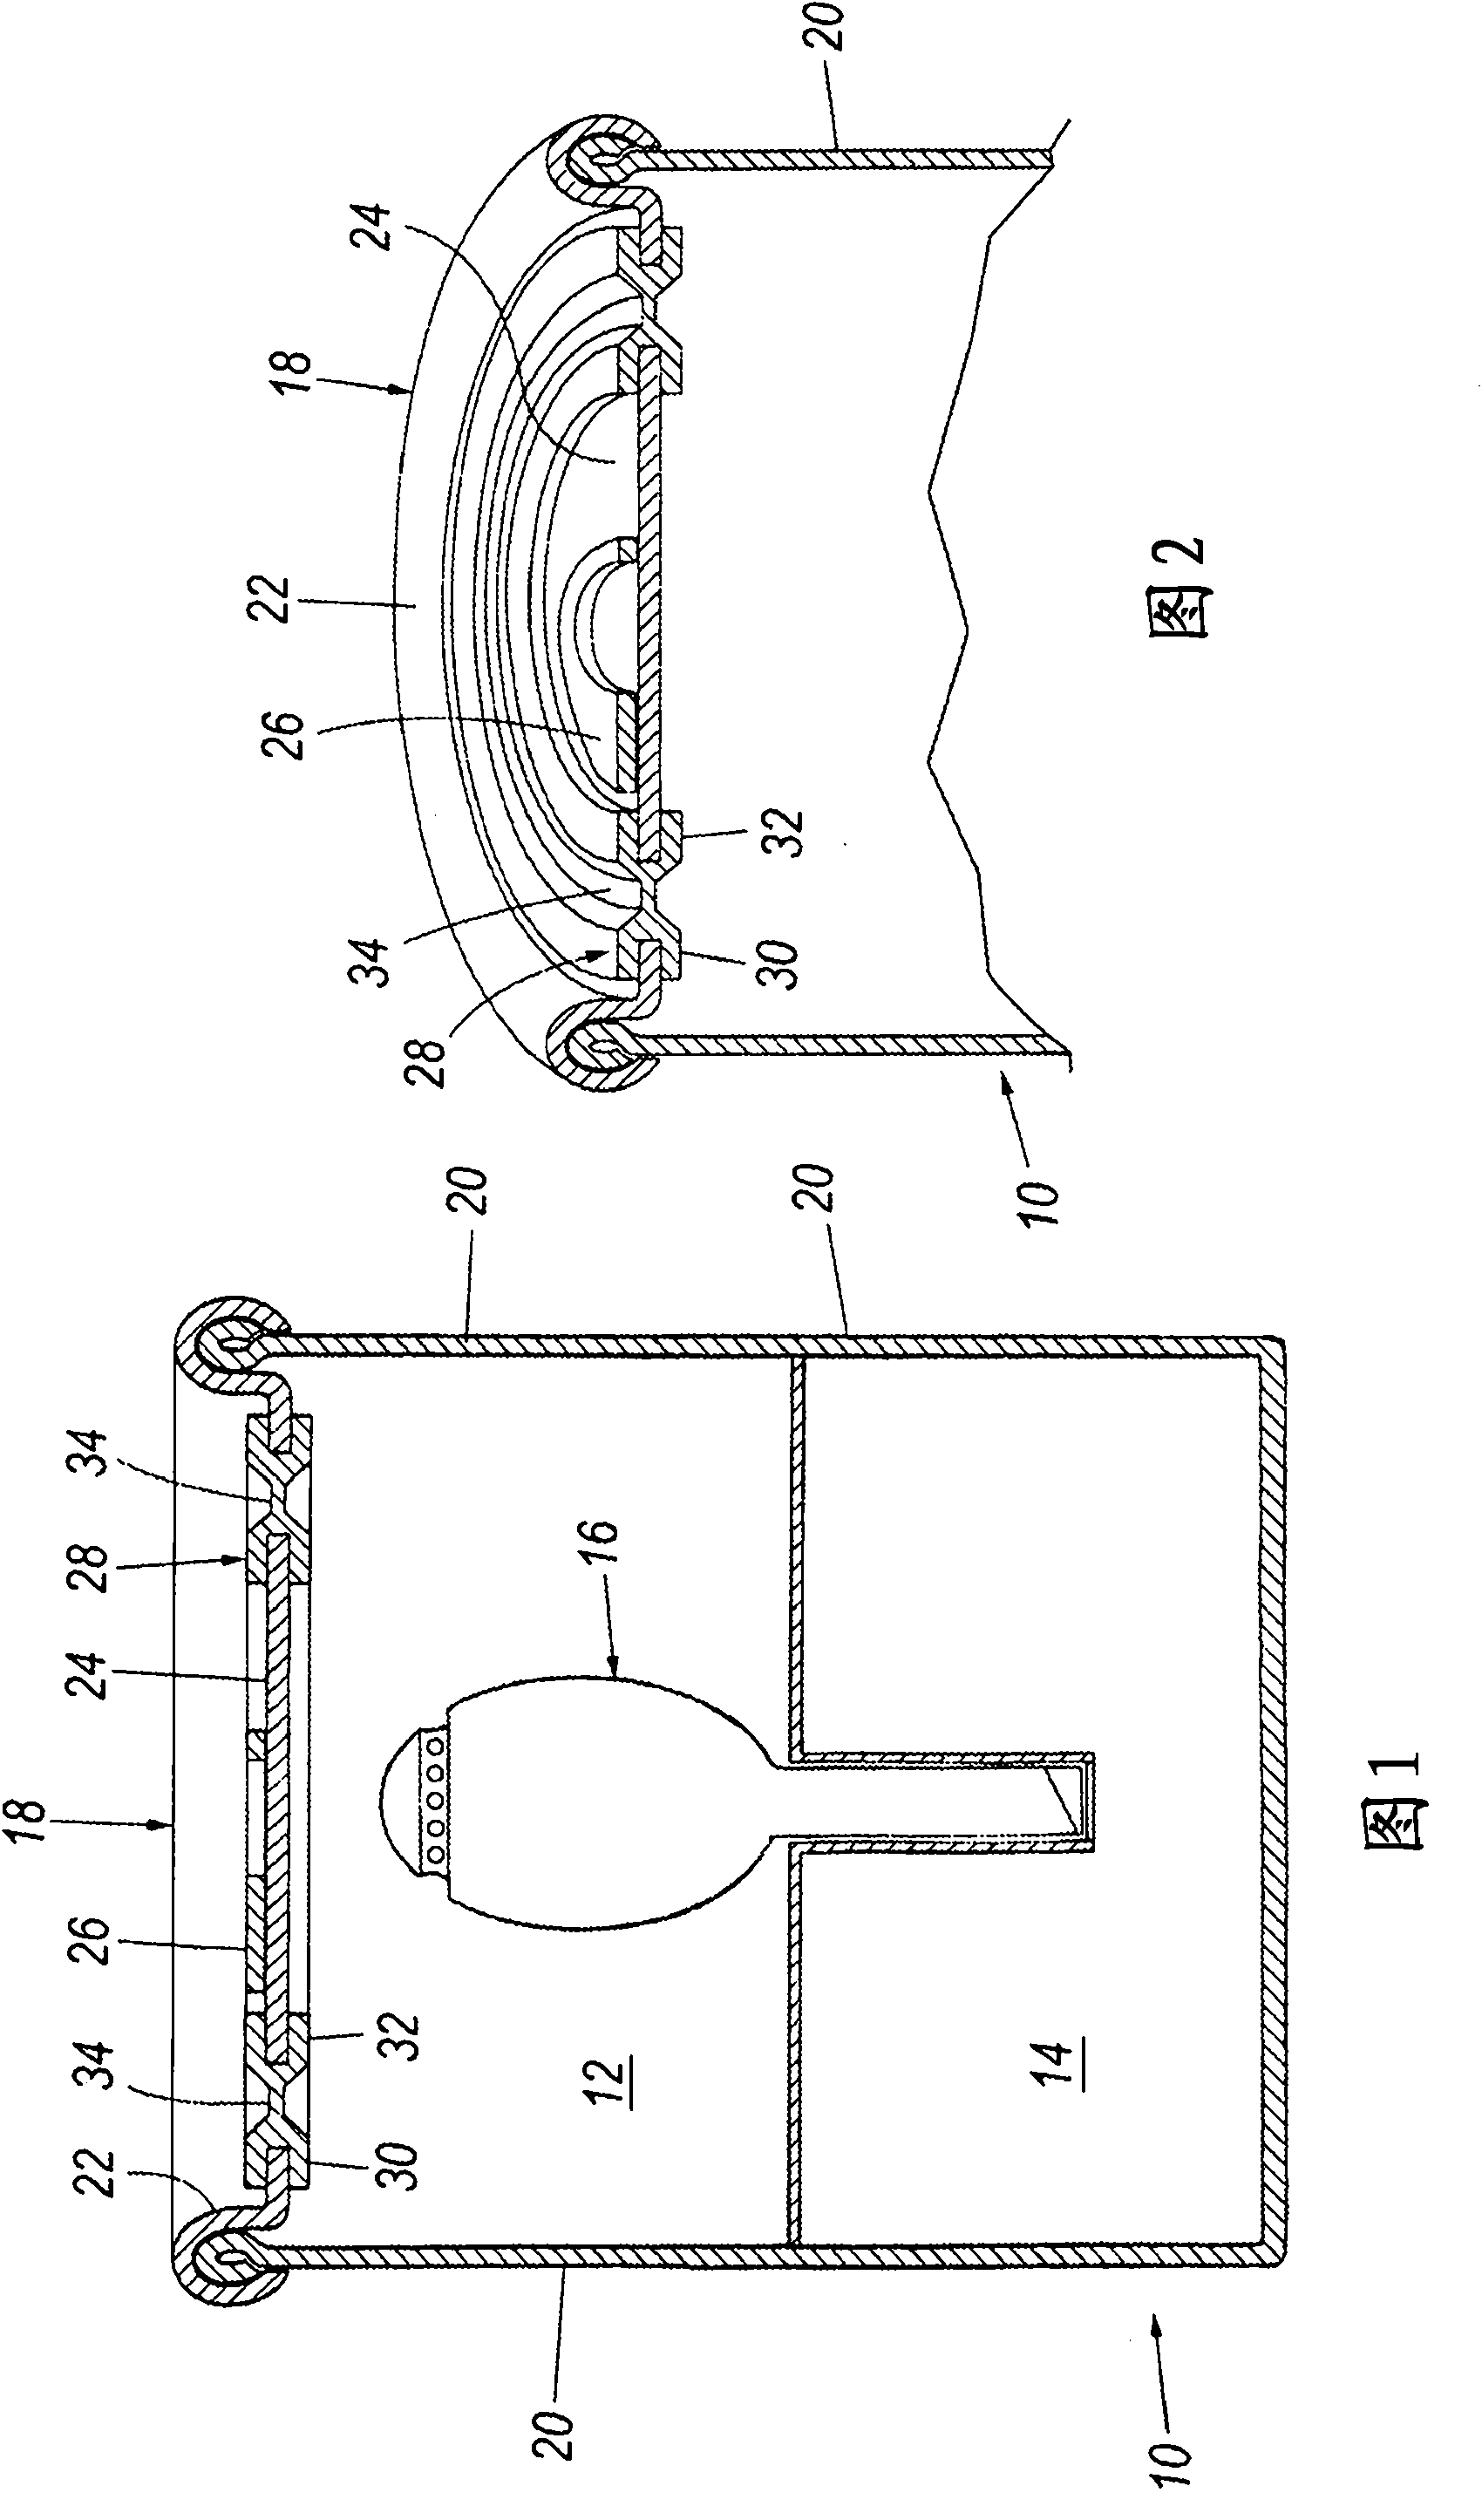 Can for the extemporaneous preparation of beverages by extraction and/or infusion, provided with a safety lid